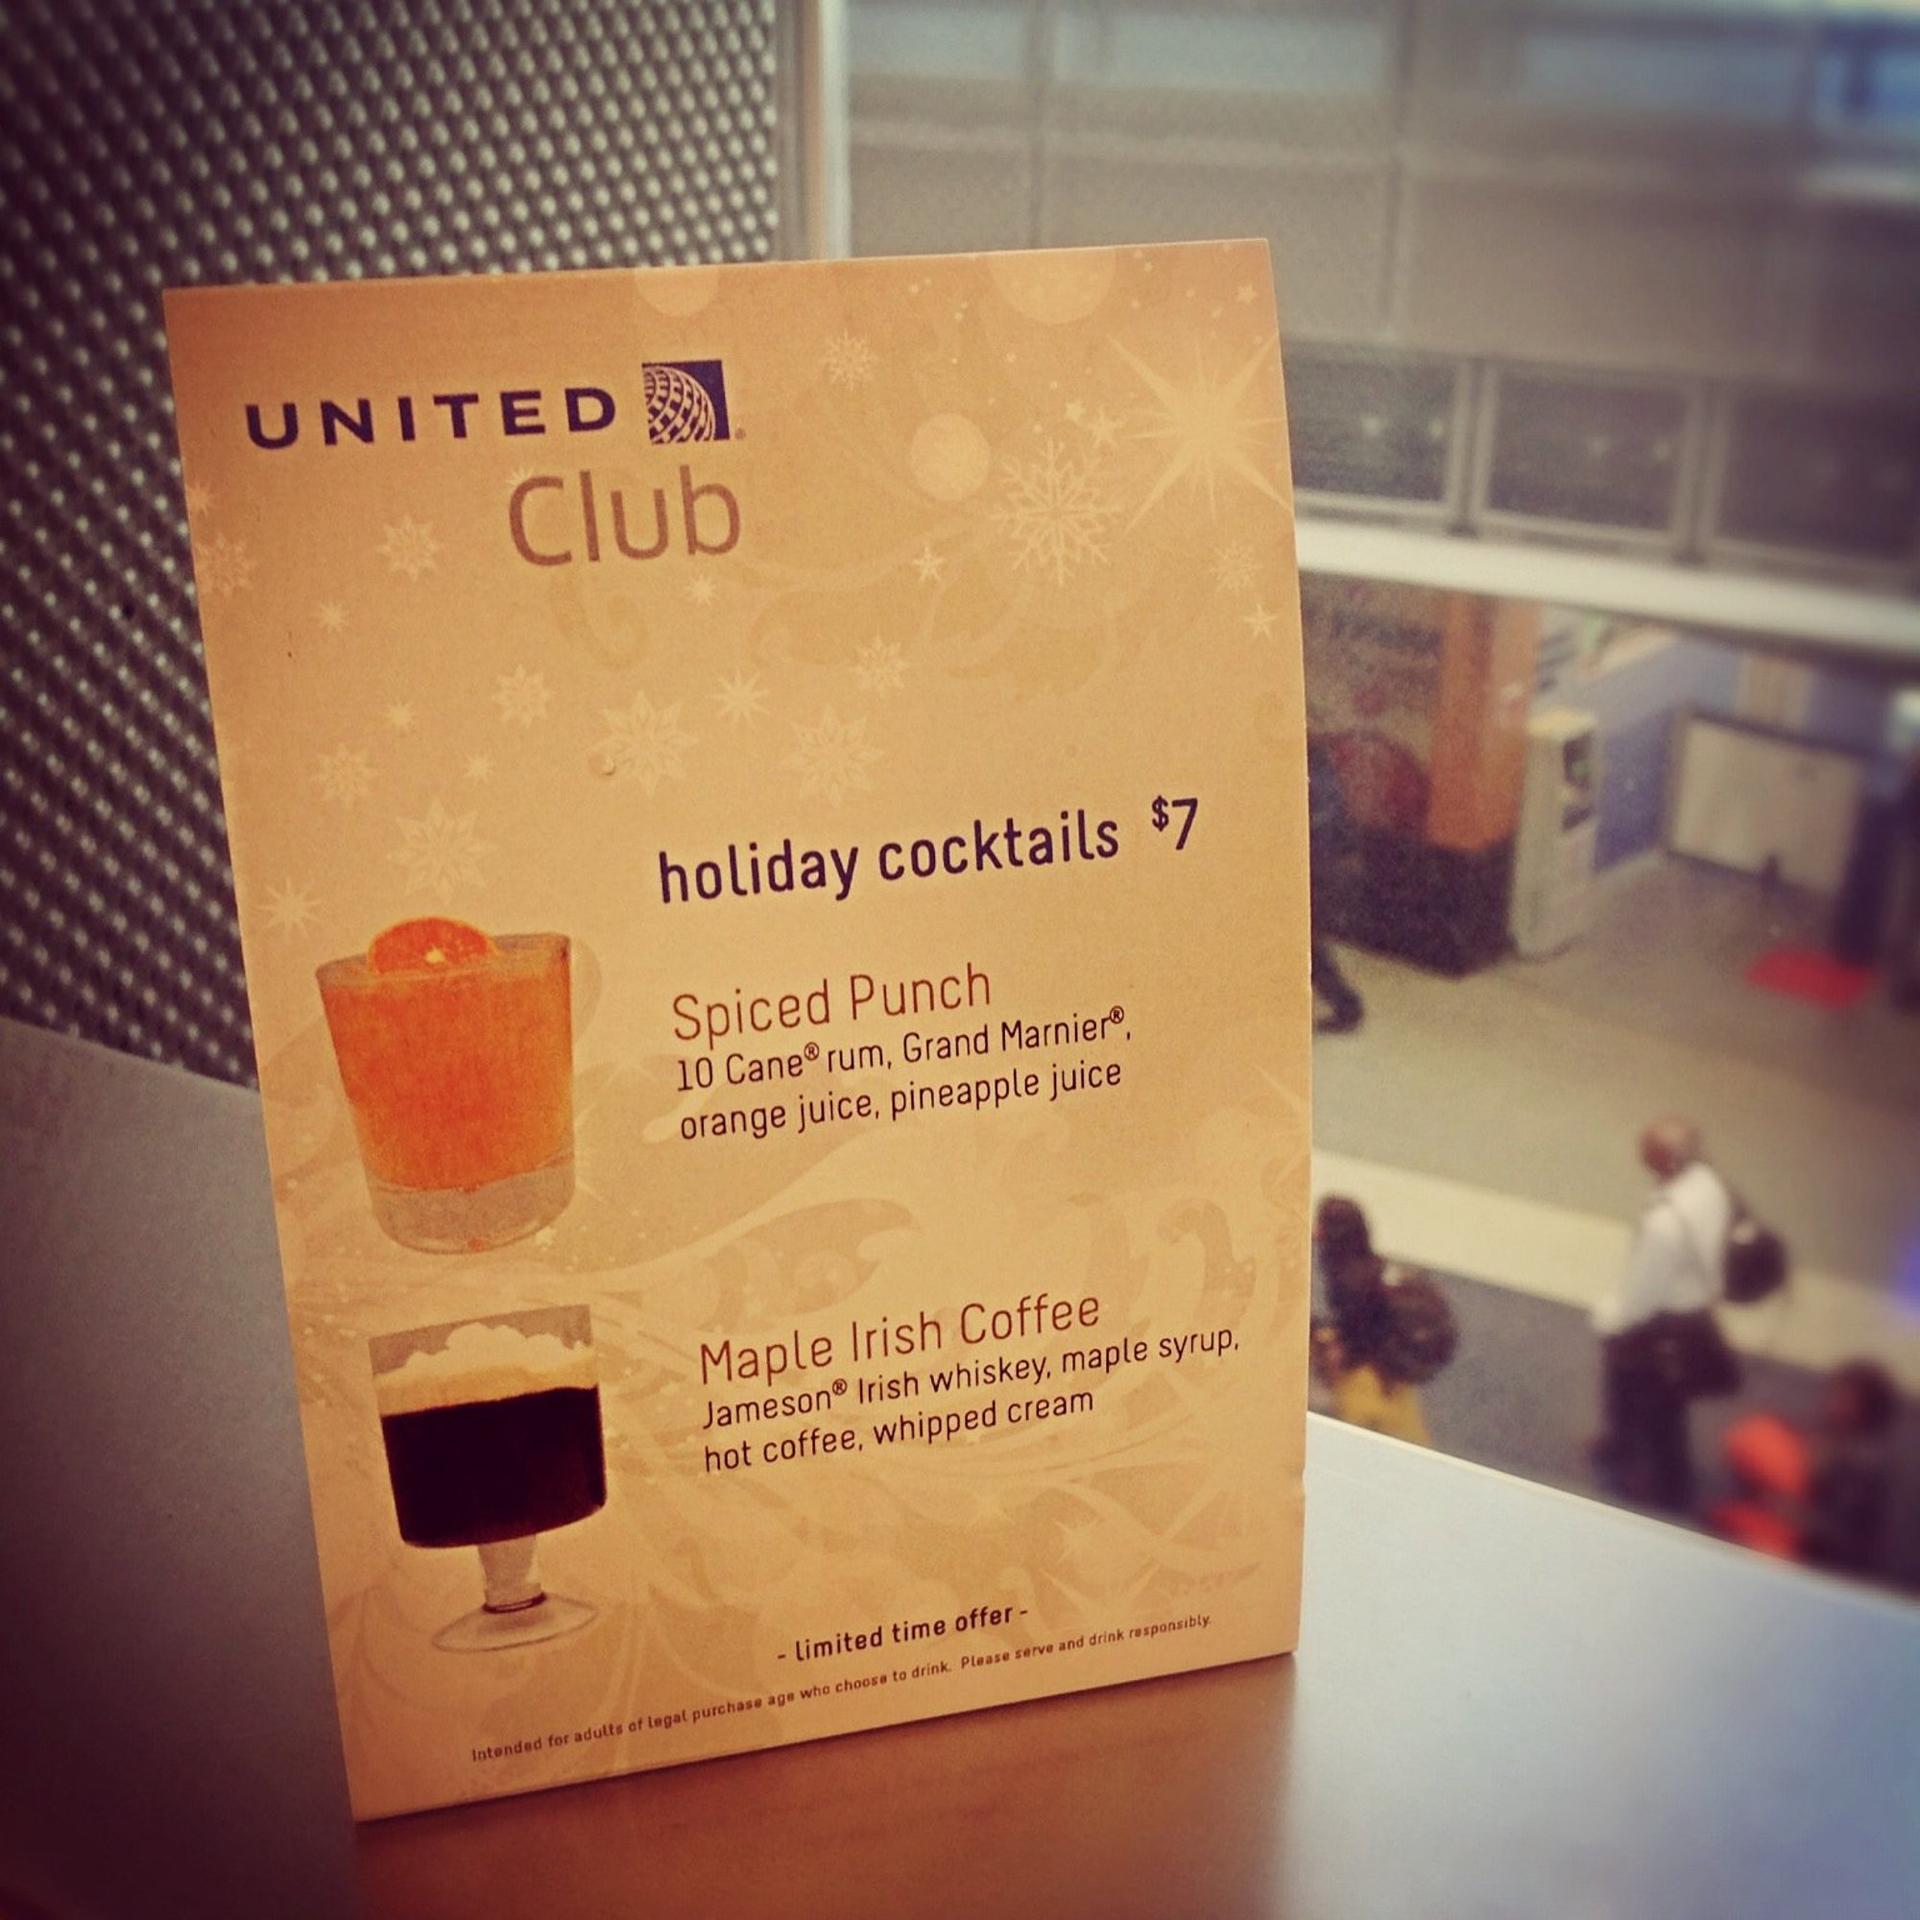 United Airlines United Club image 2 of 4